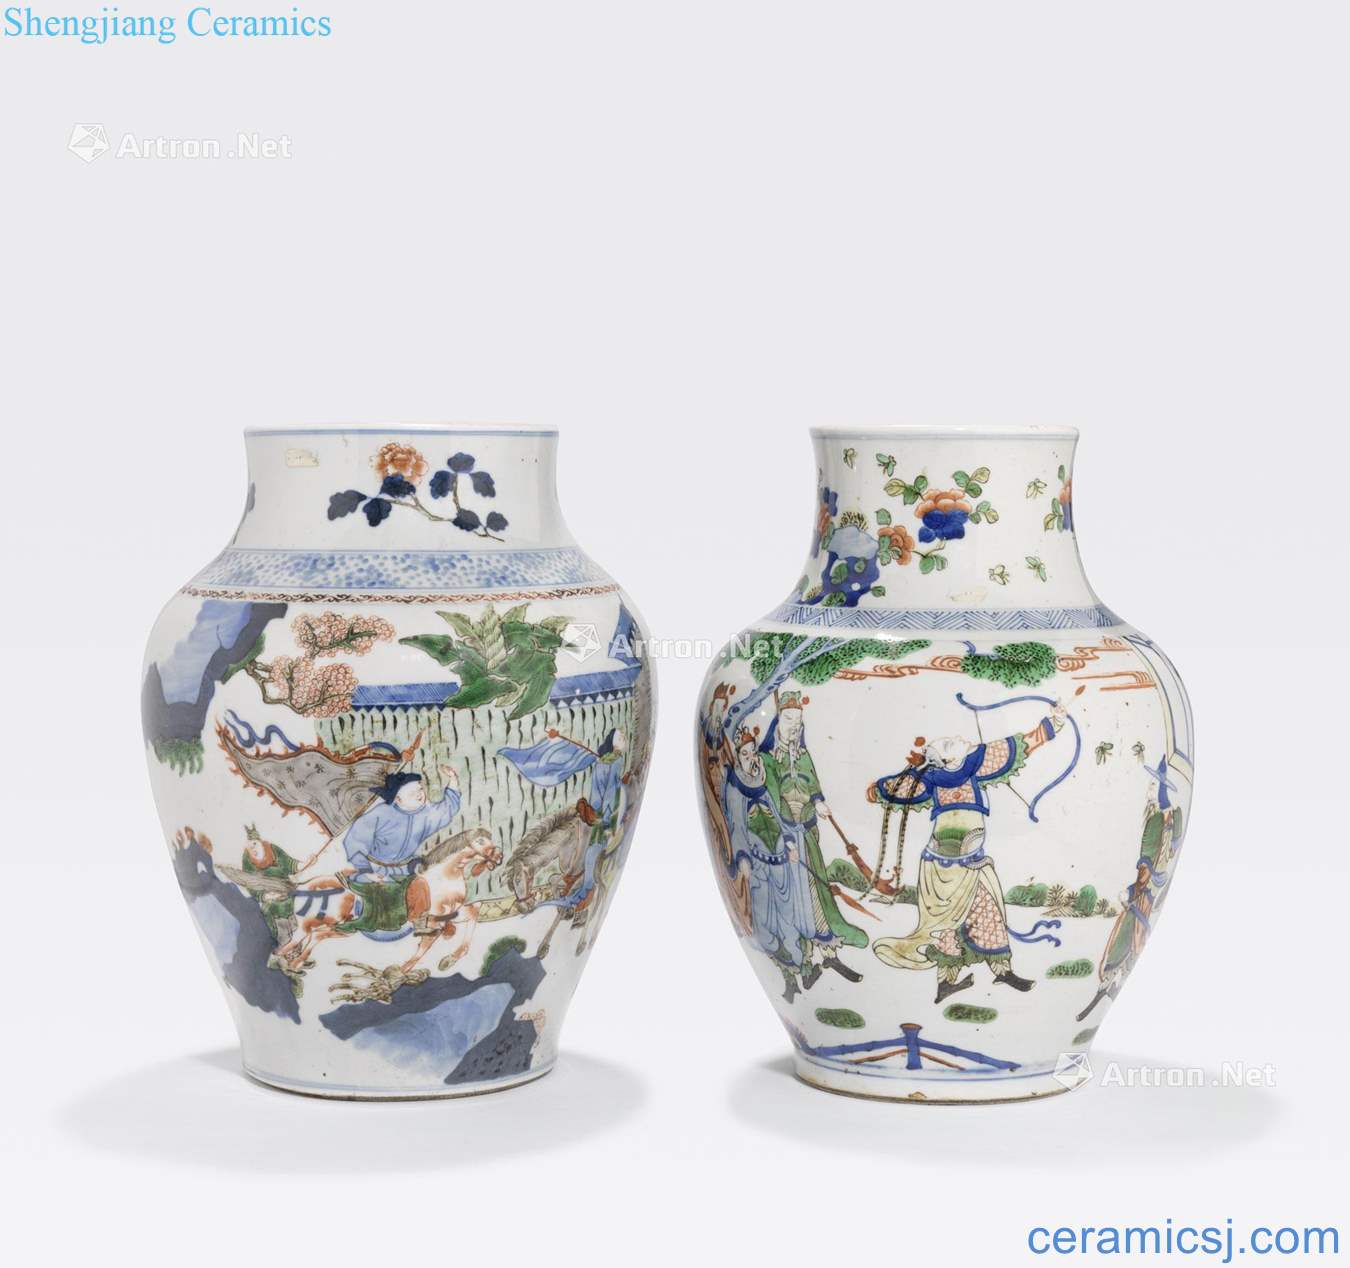 Newest the Qing/Republic period TWO TRANSITIONAL STYLE JARS WITH WUCAI DECORATION